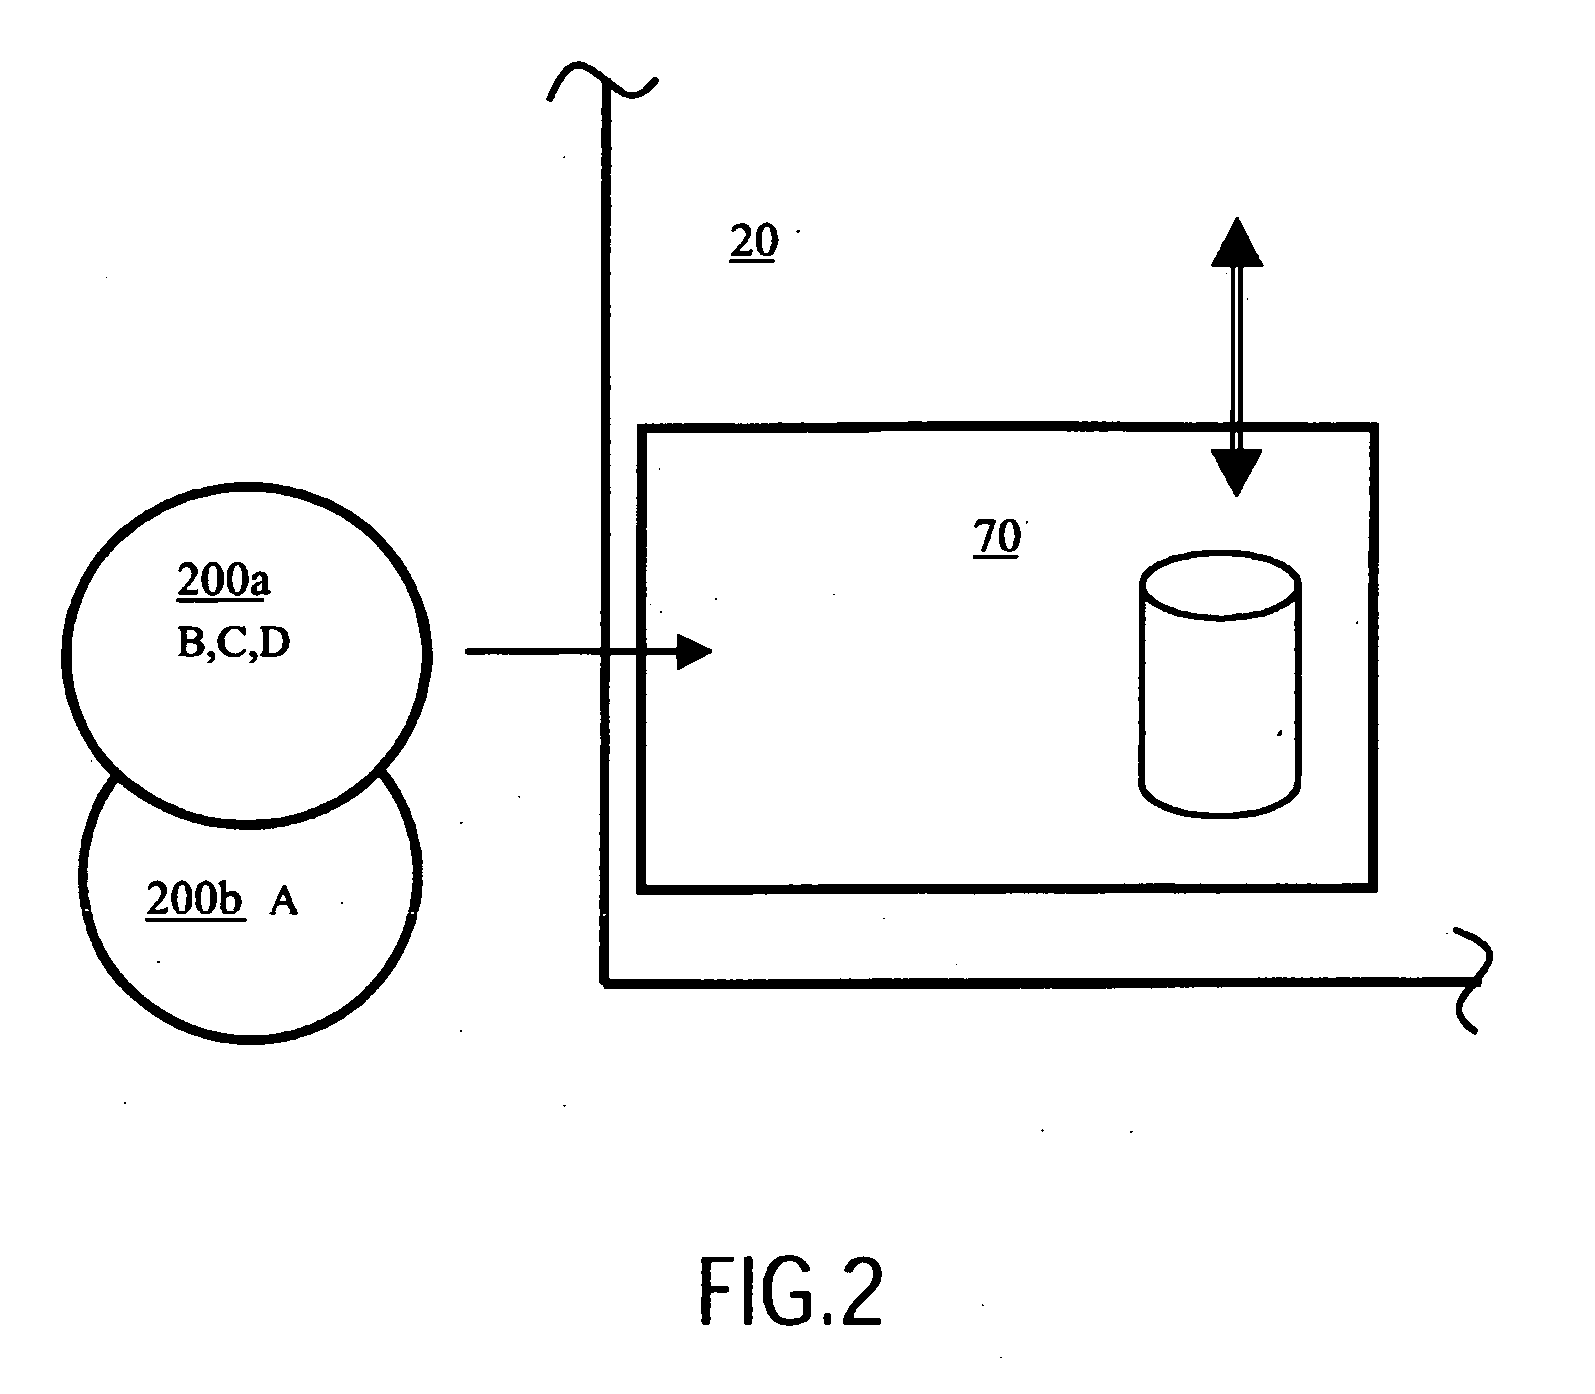 Method of Controlling Access to a Communication Network